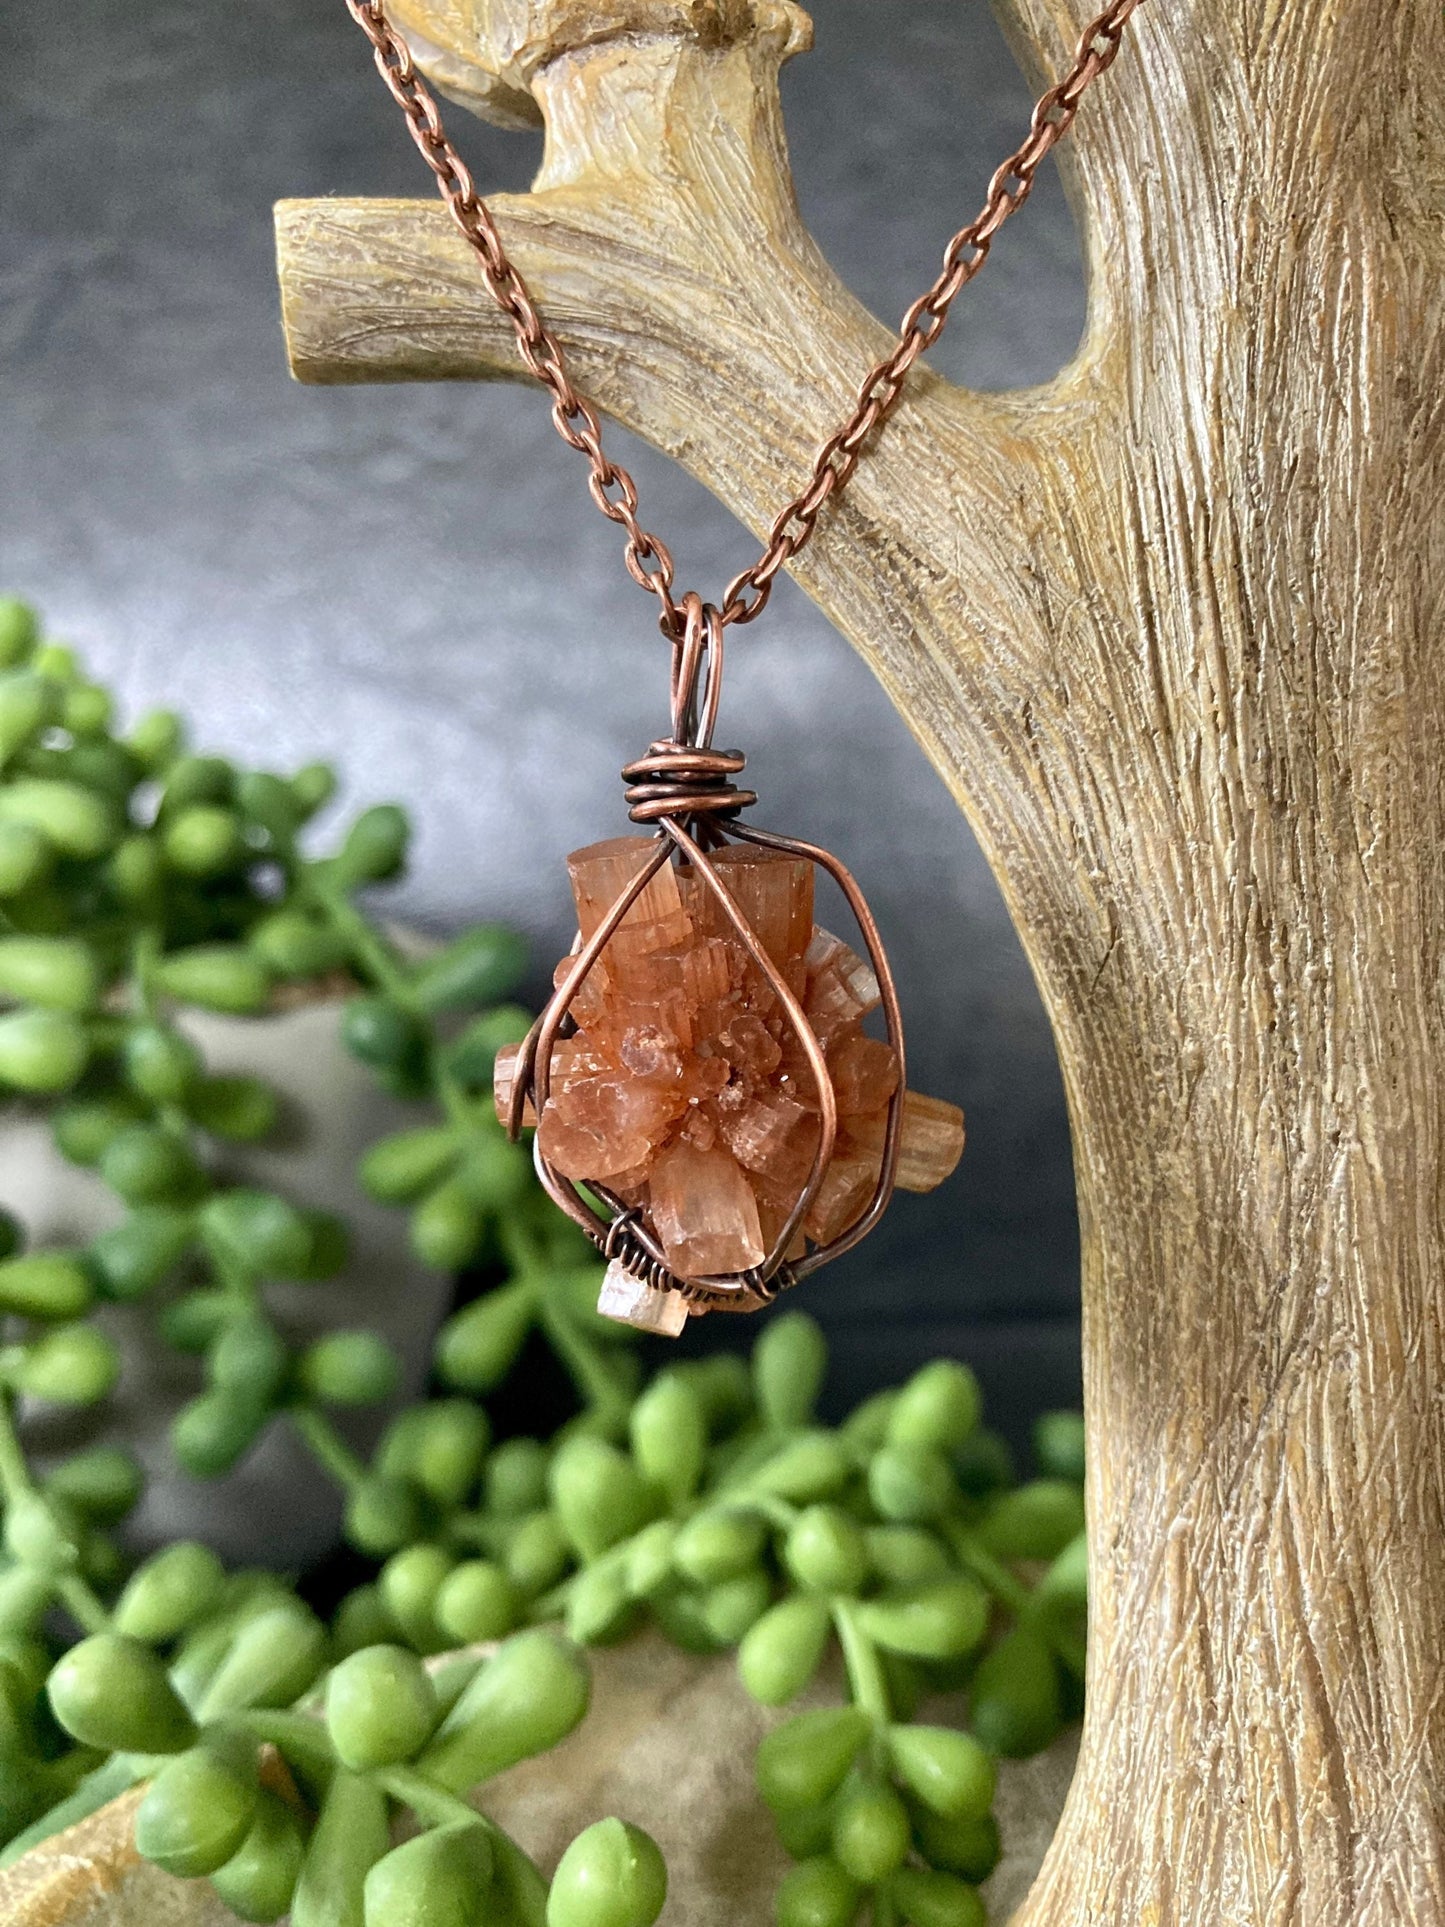 Aragonite pendant handmade necklace wire wrapped natural stone with 18 inch length chain